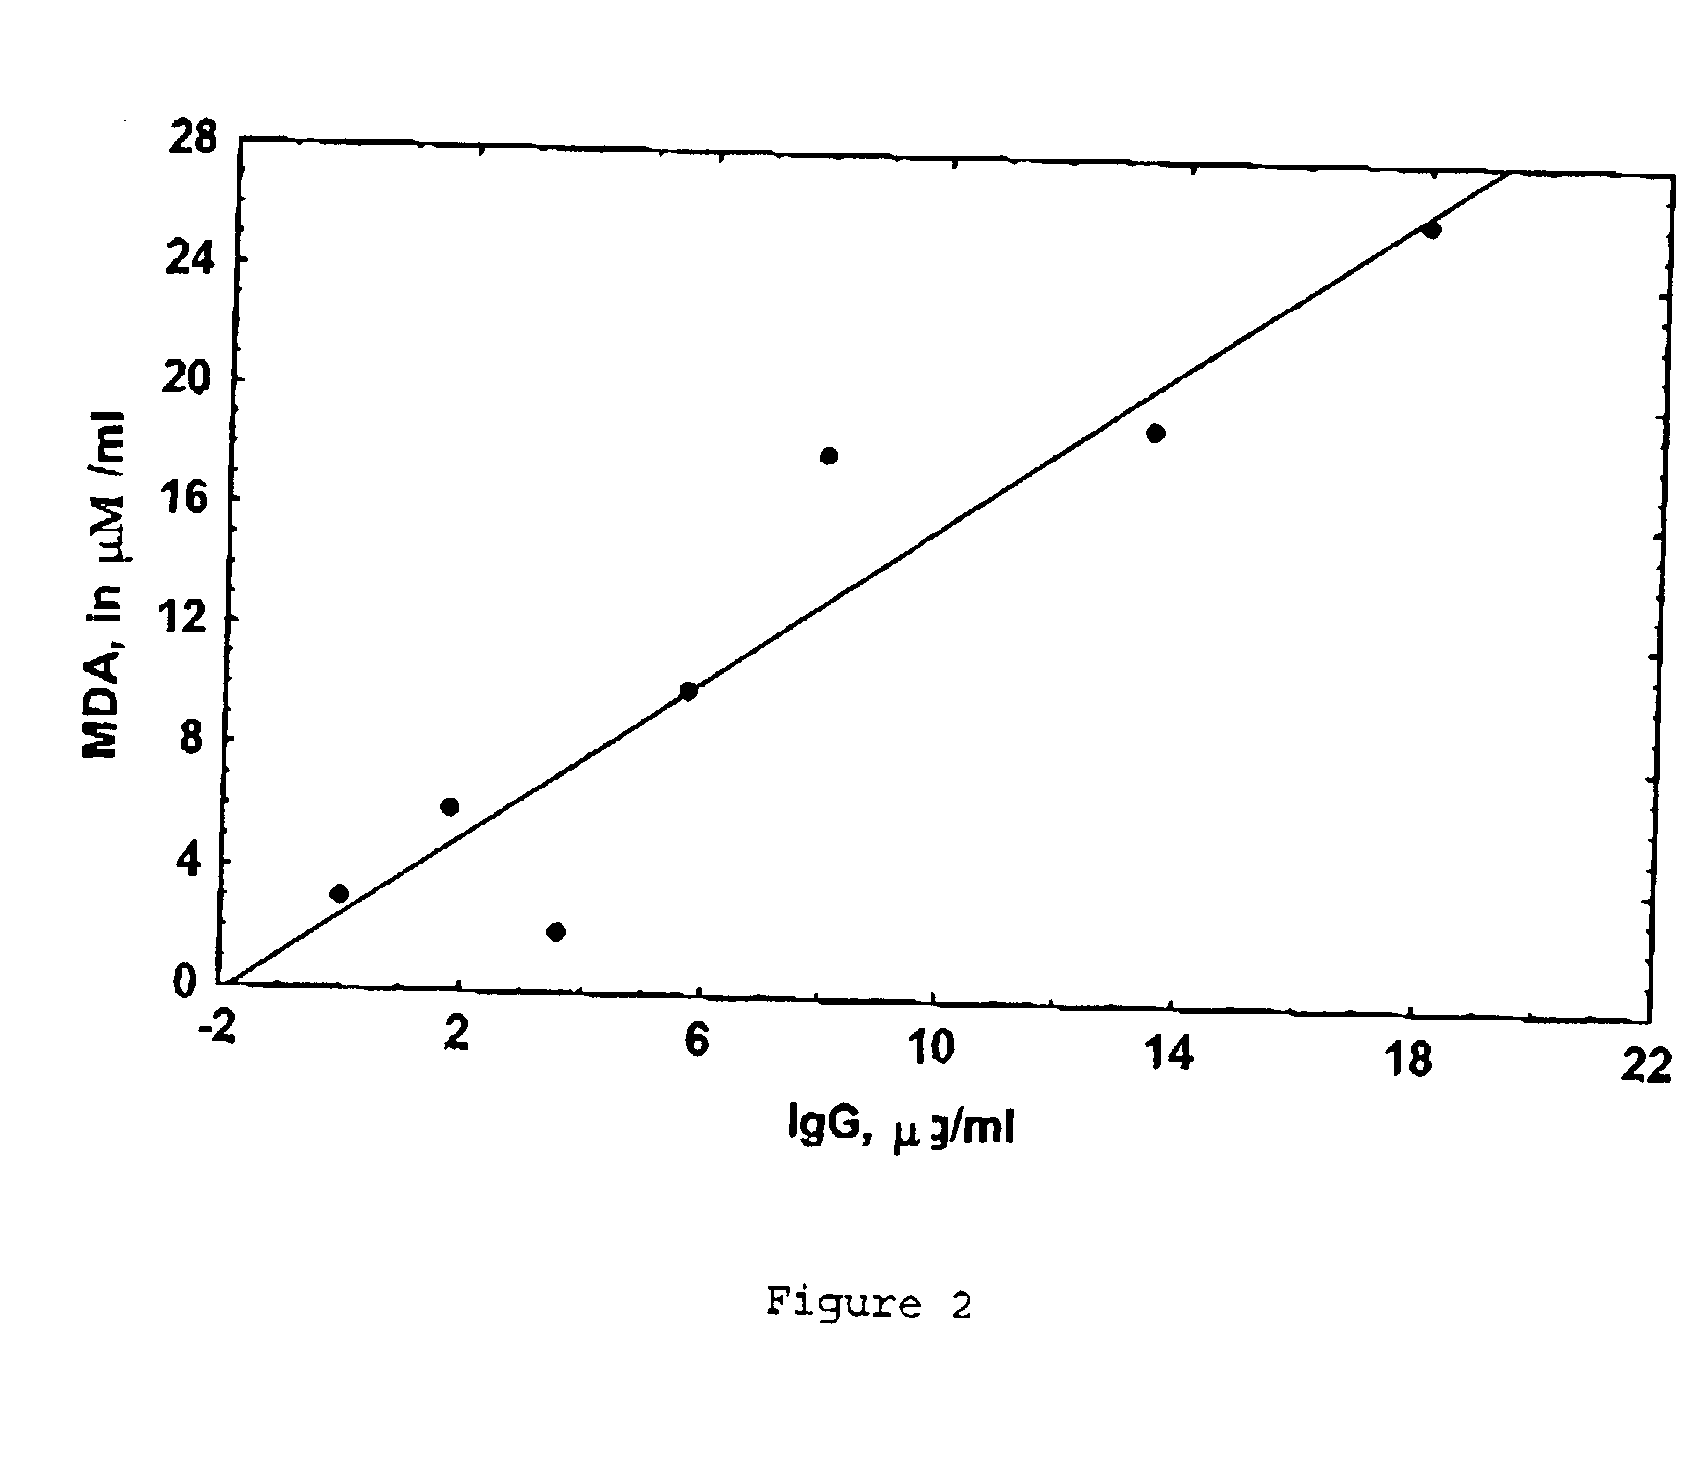 Methods relating to treatment of atheroaclerosis